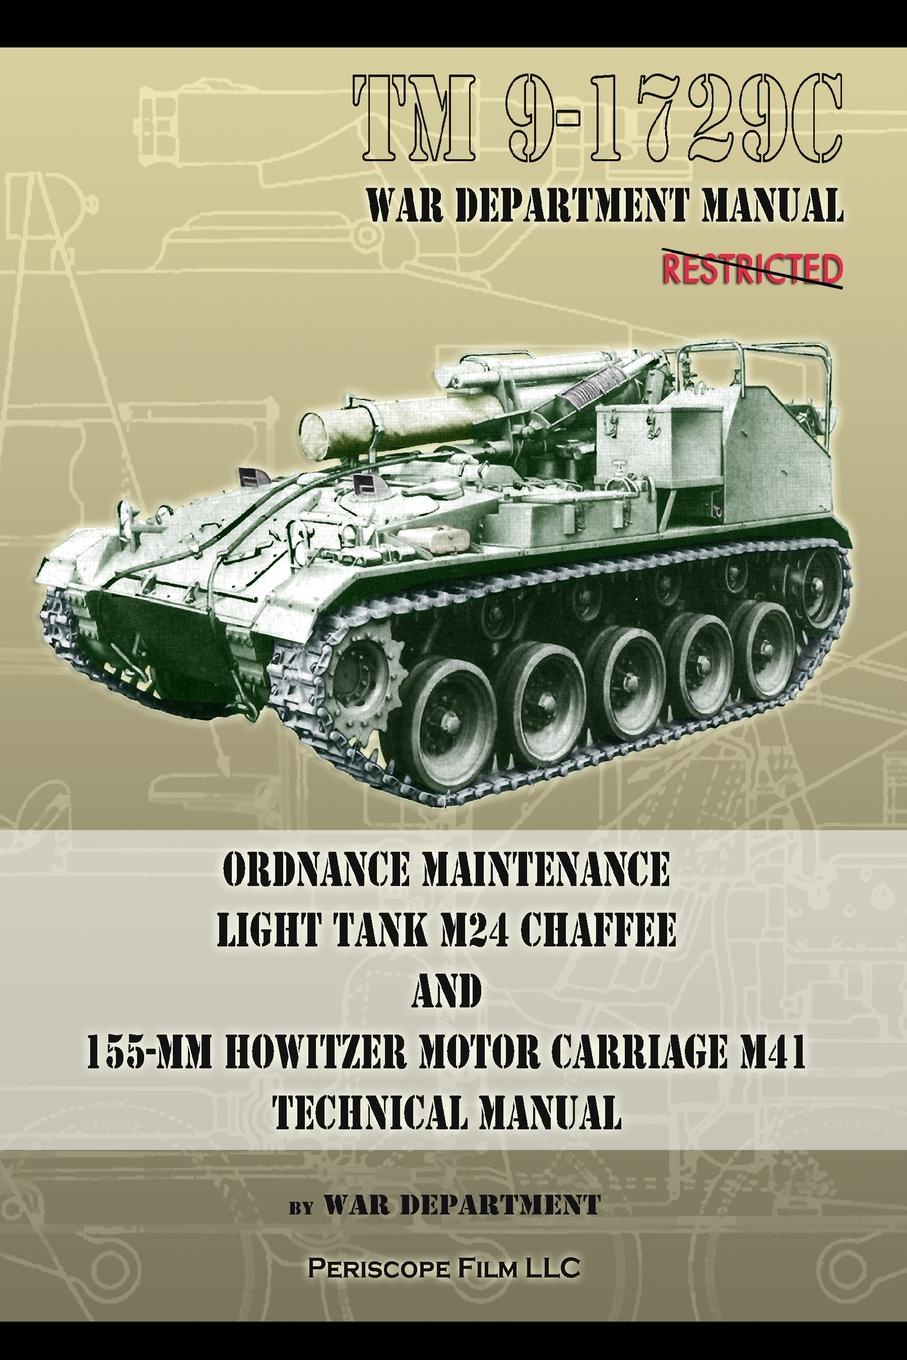 TM9-1729C Ordnance Maintenance Light Tank M24 Chaffee. and 155-mm Howitzer Motor Carriage M41 Technical Manual